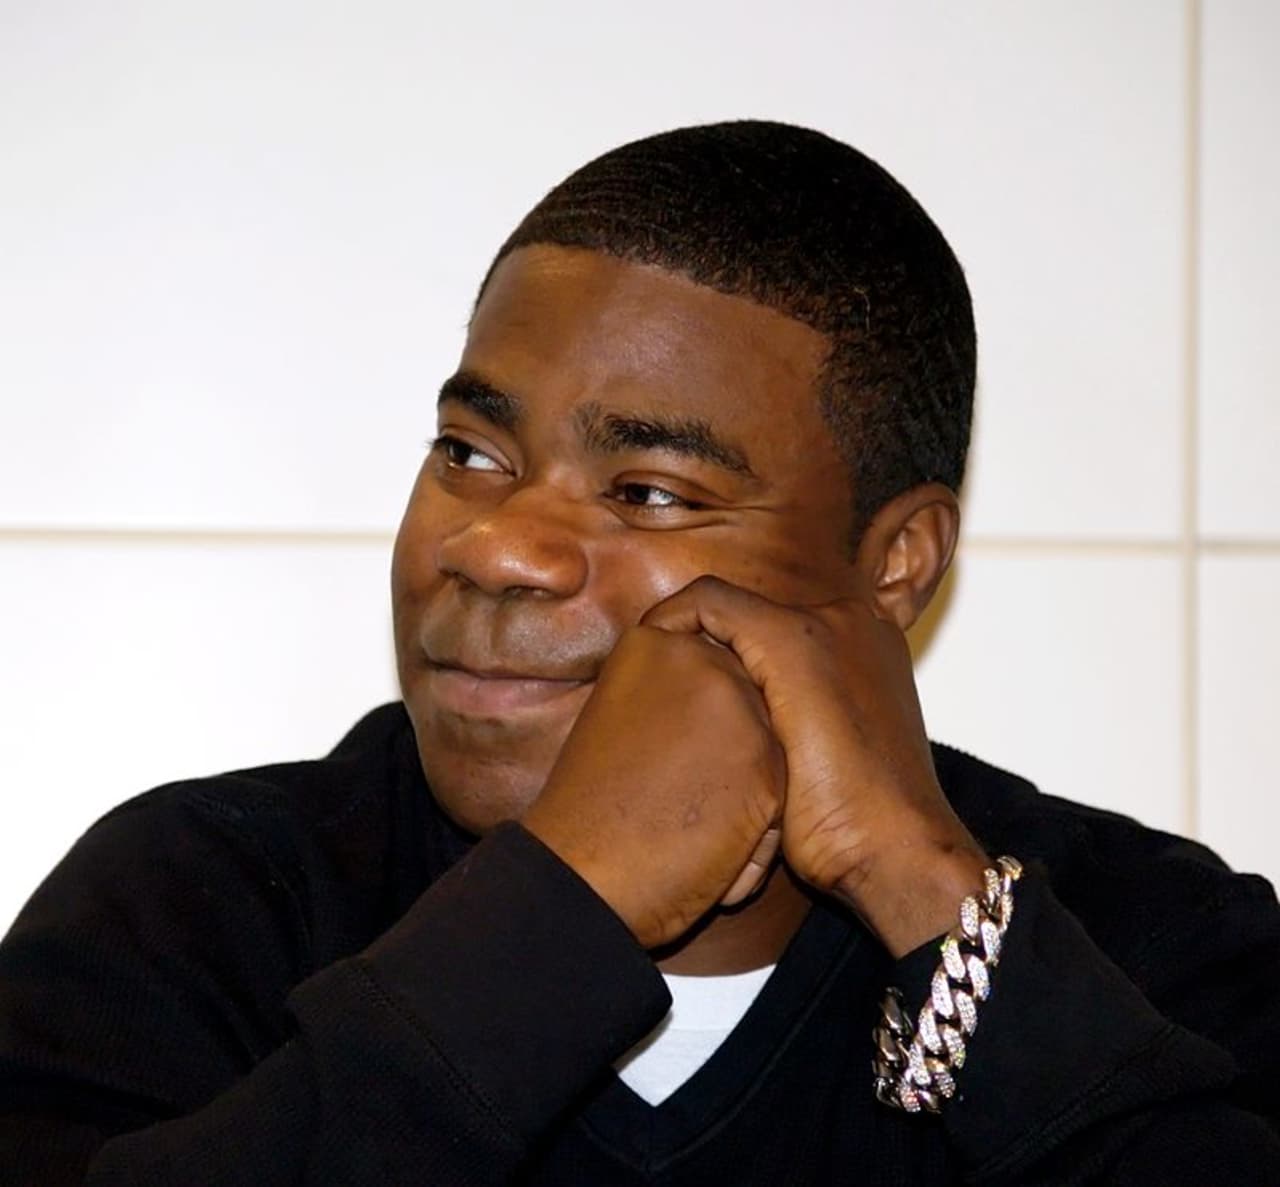 Tracy Morgan returns to SNL this fall.